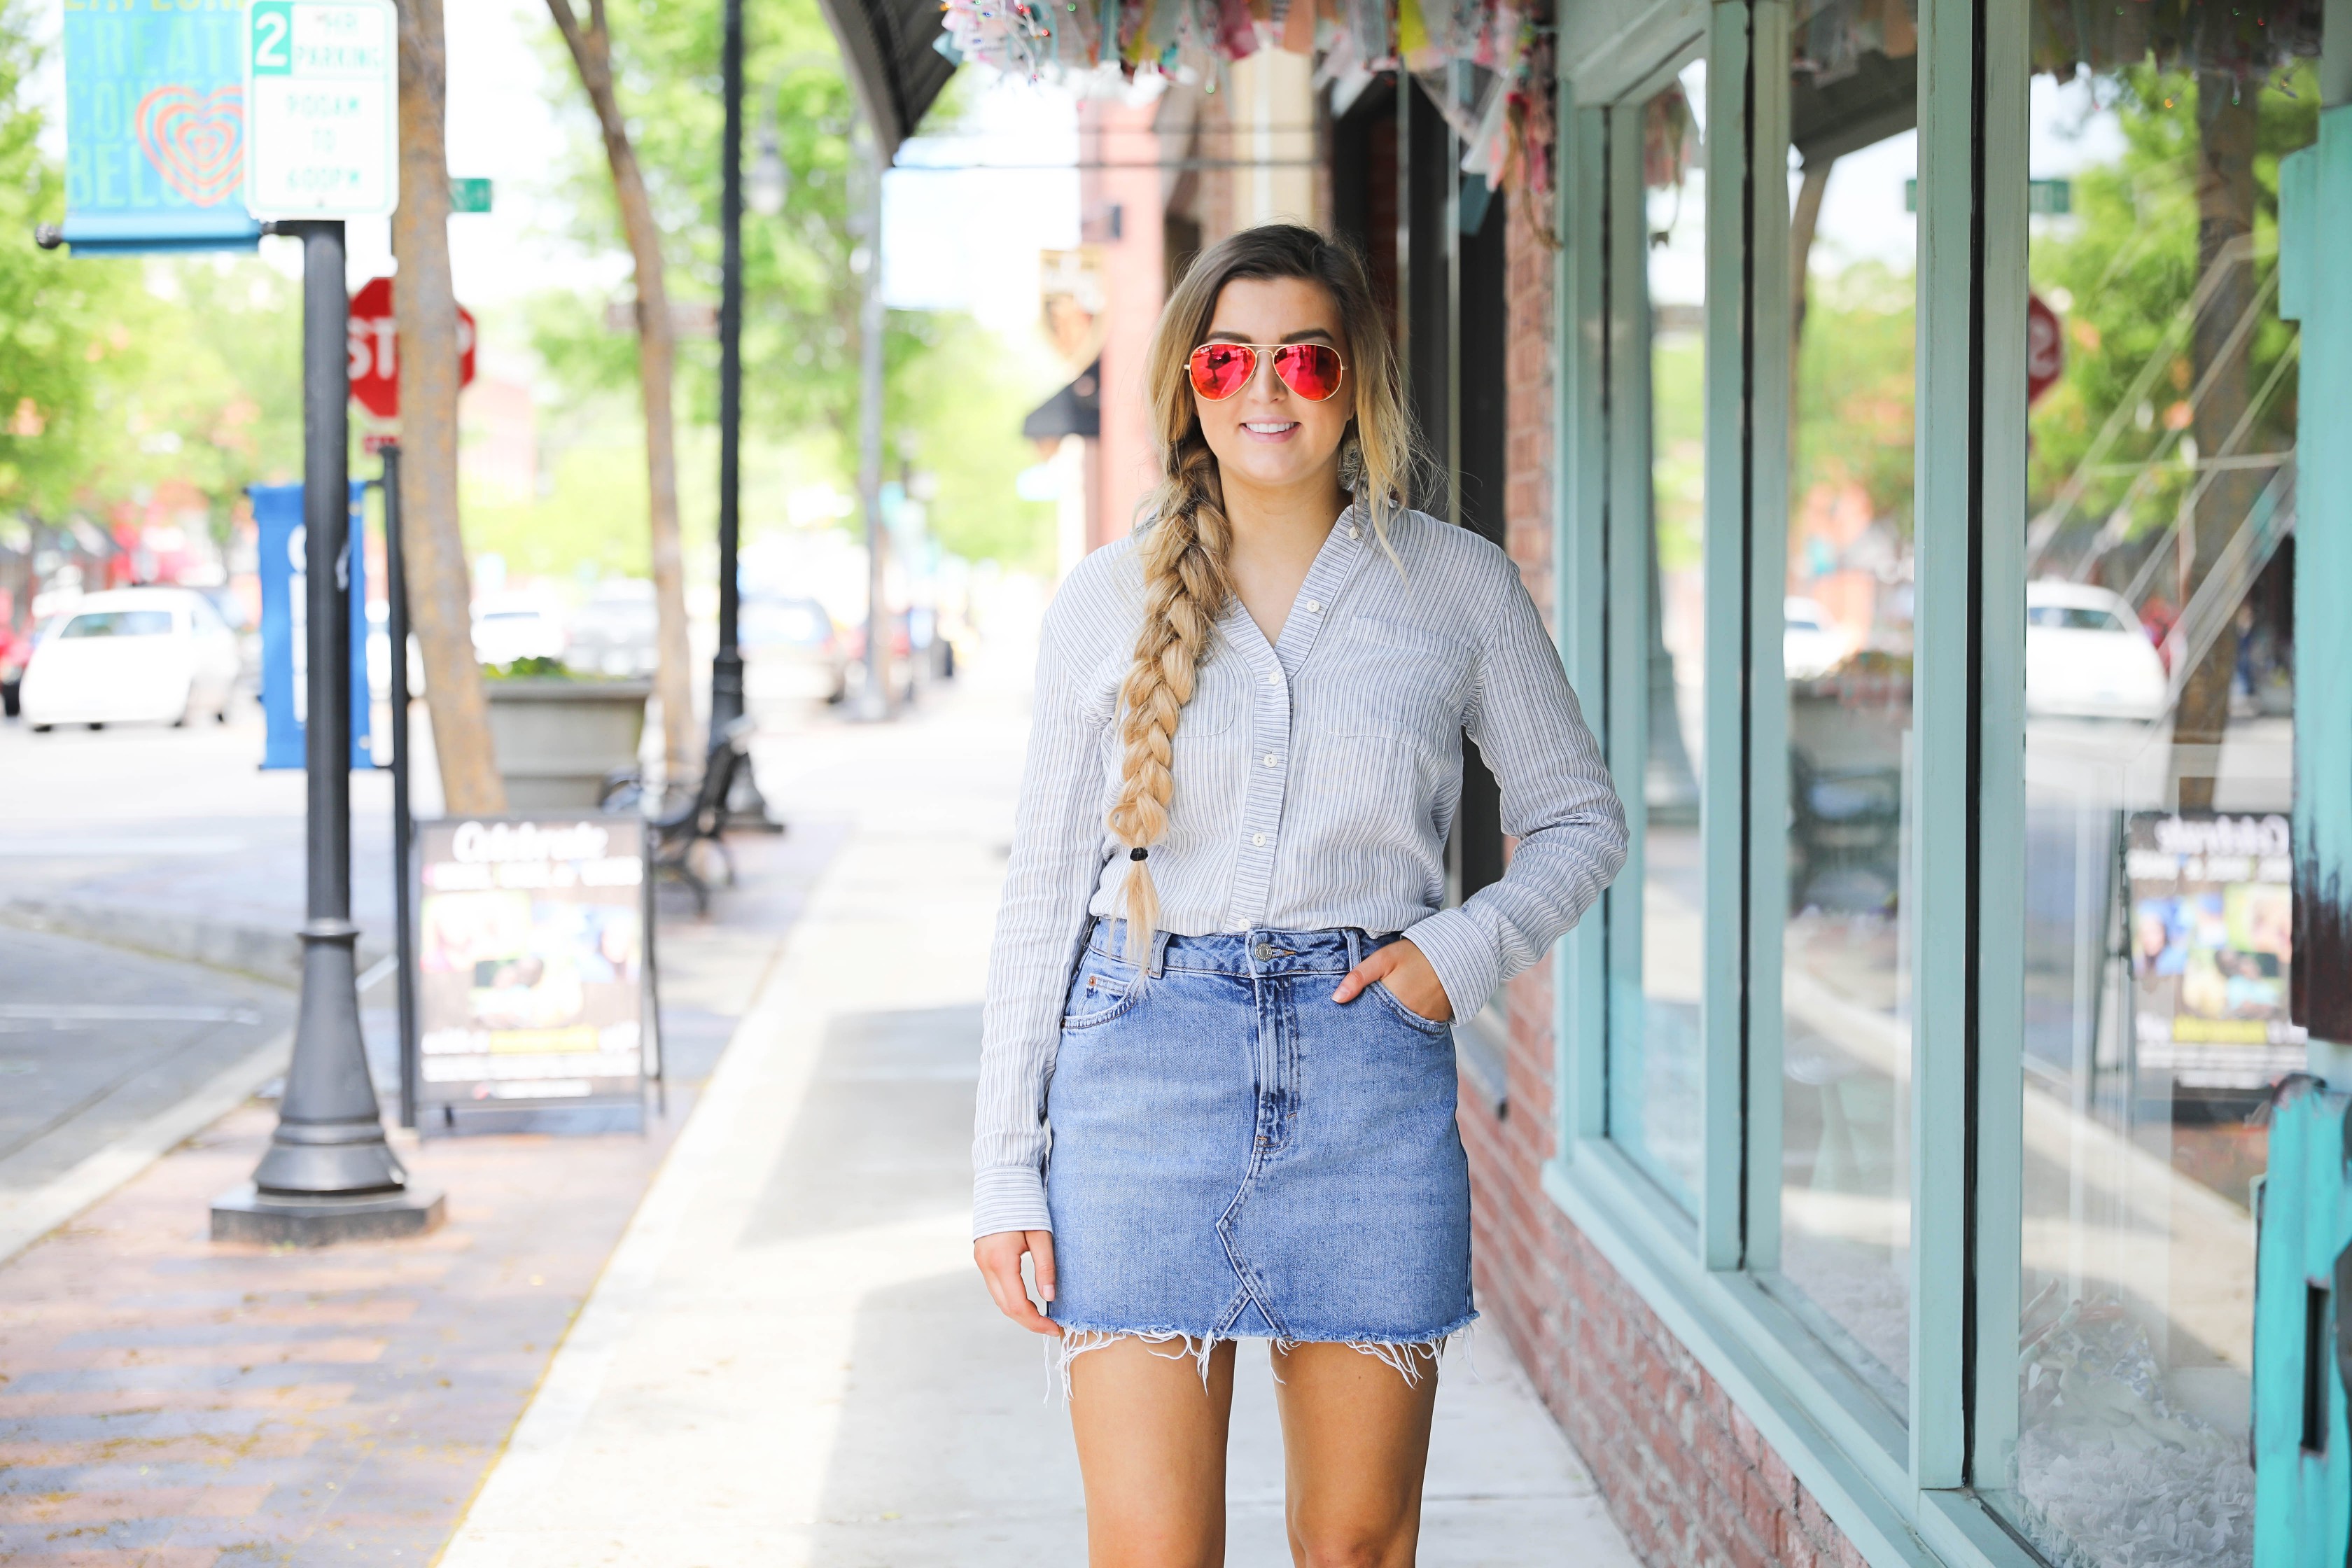 Jean skirt with oxford and ray ban sunglasses on fashion blog daily dose of charm by Lauren Lindmark dailydoseofcharm.com